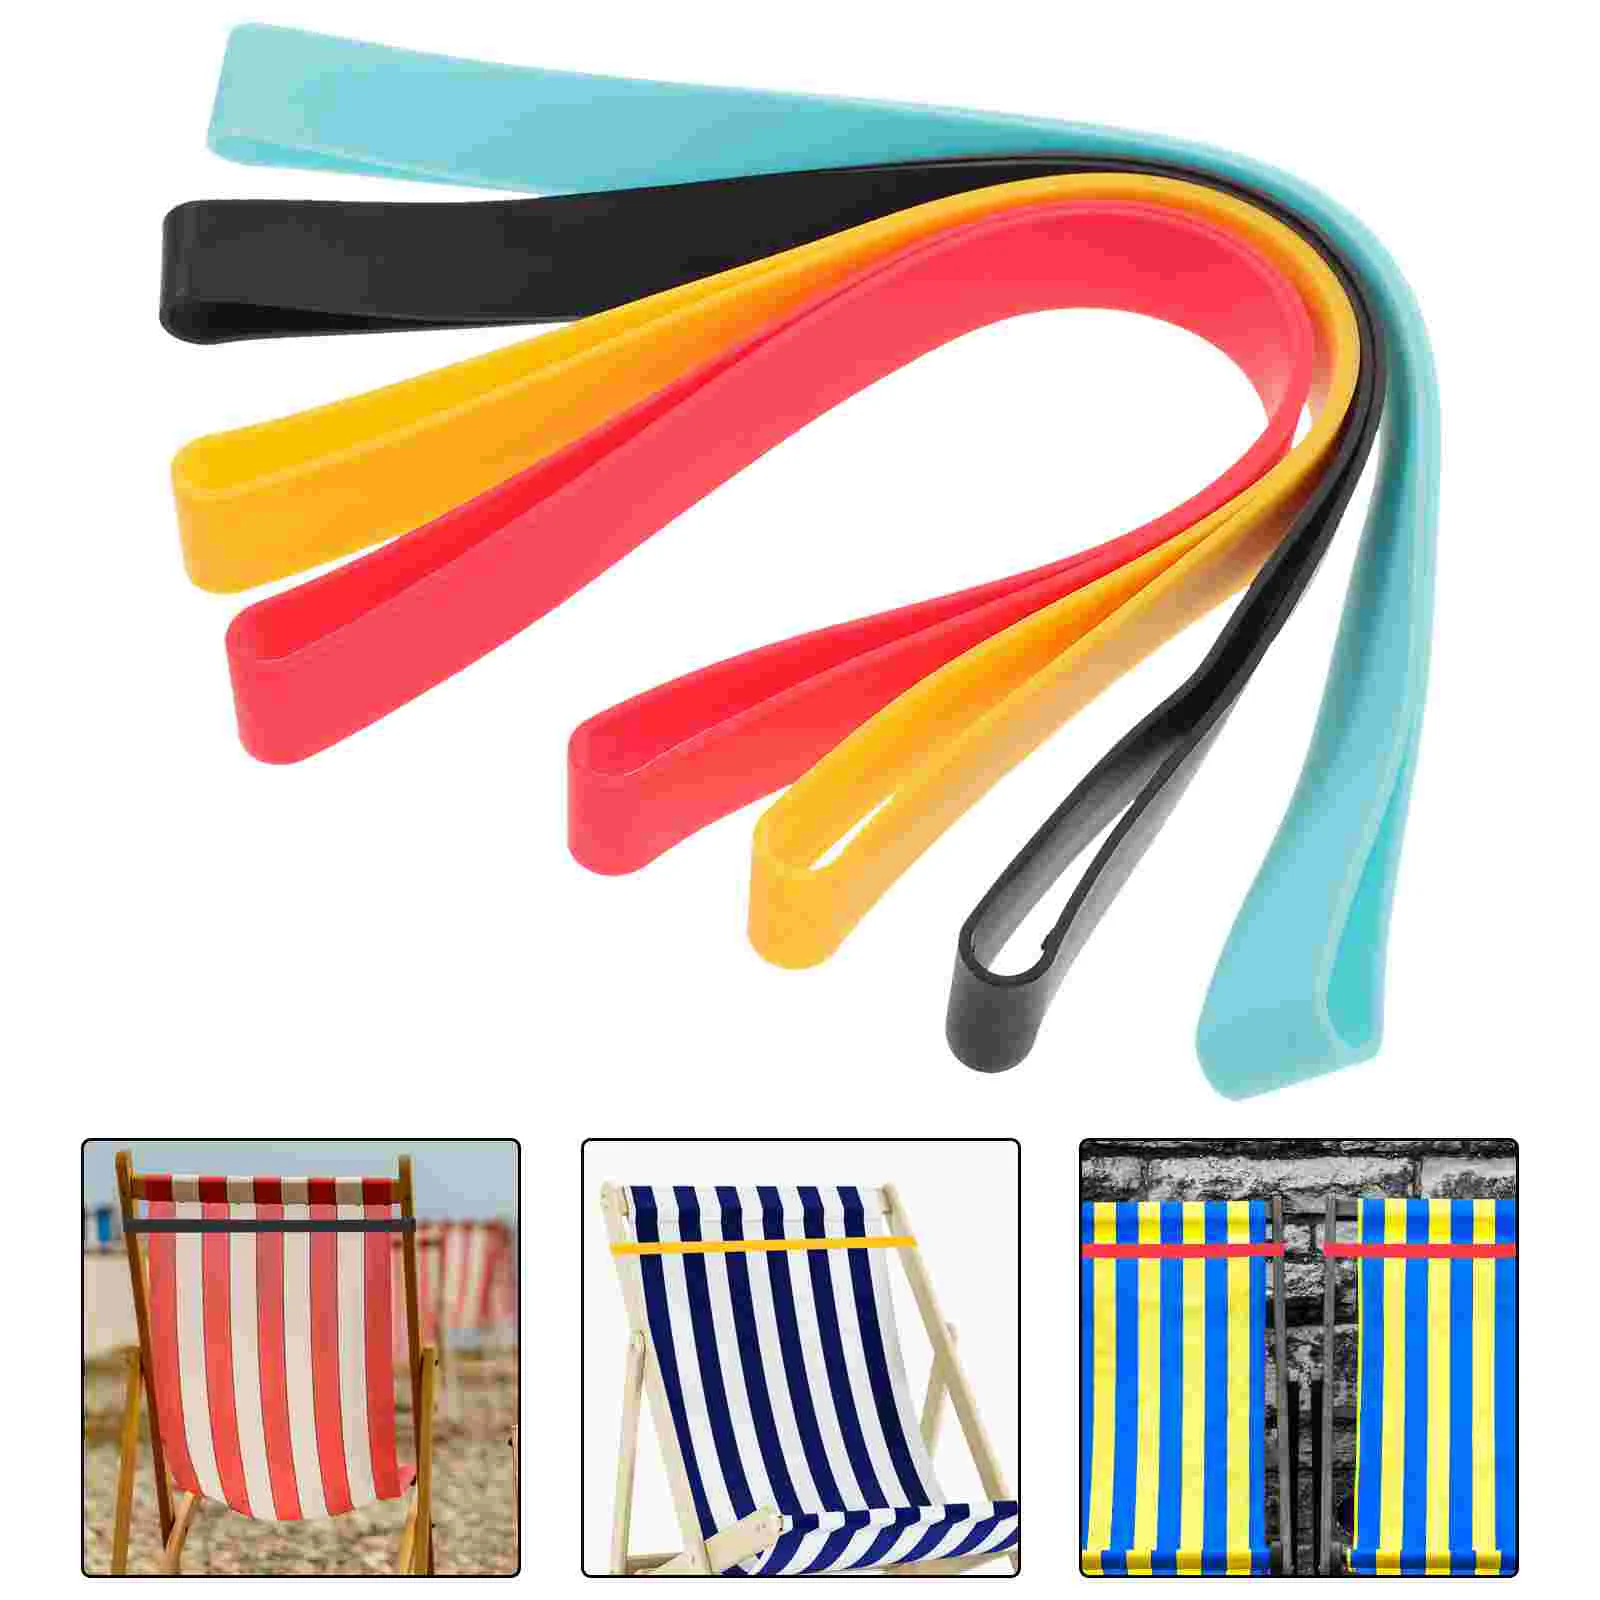 

4 Pcs Entrained Beach Essentials Silicone Towel Fixing Bands Clip Stretchable Cruise Ship Silica Gel Rubber Colored